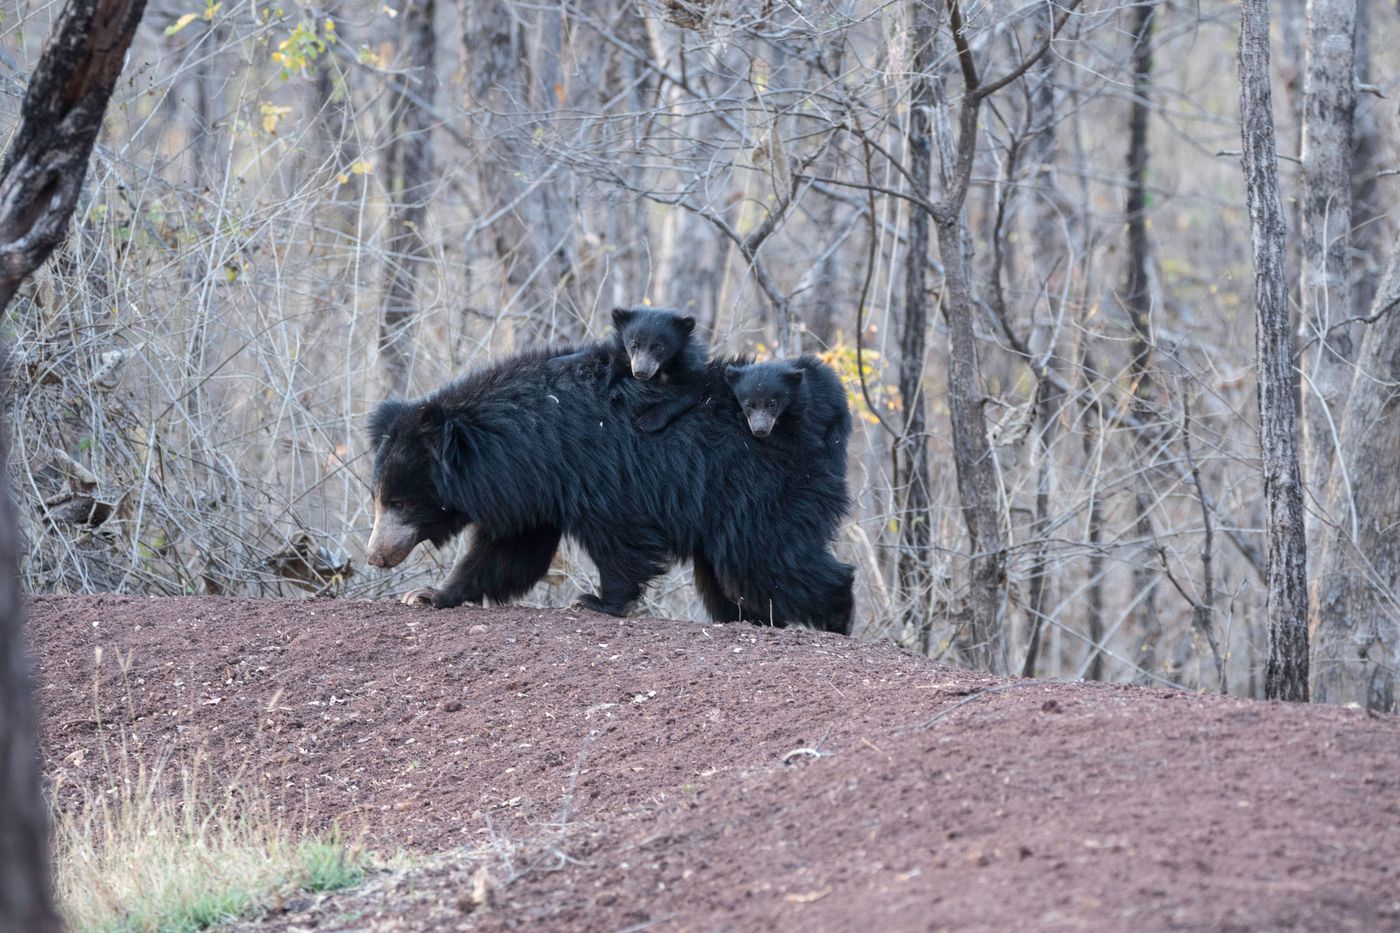 A wooly sloth bear female carrying her off-spring on her back. Photograph by Karl Weller